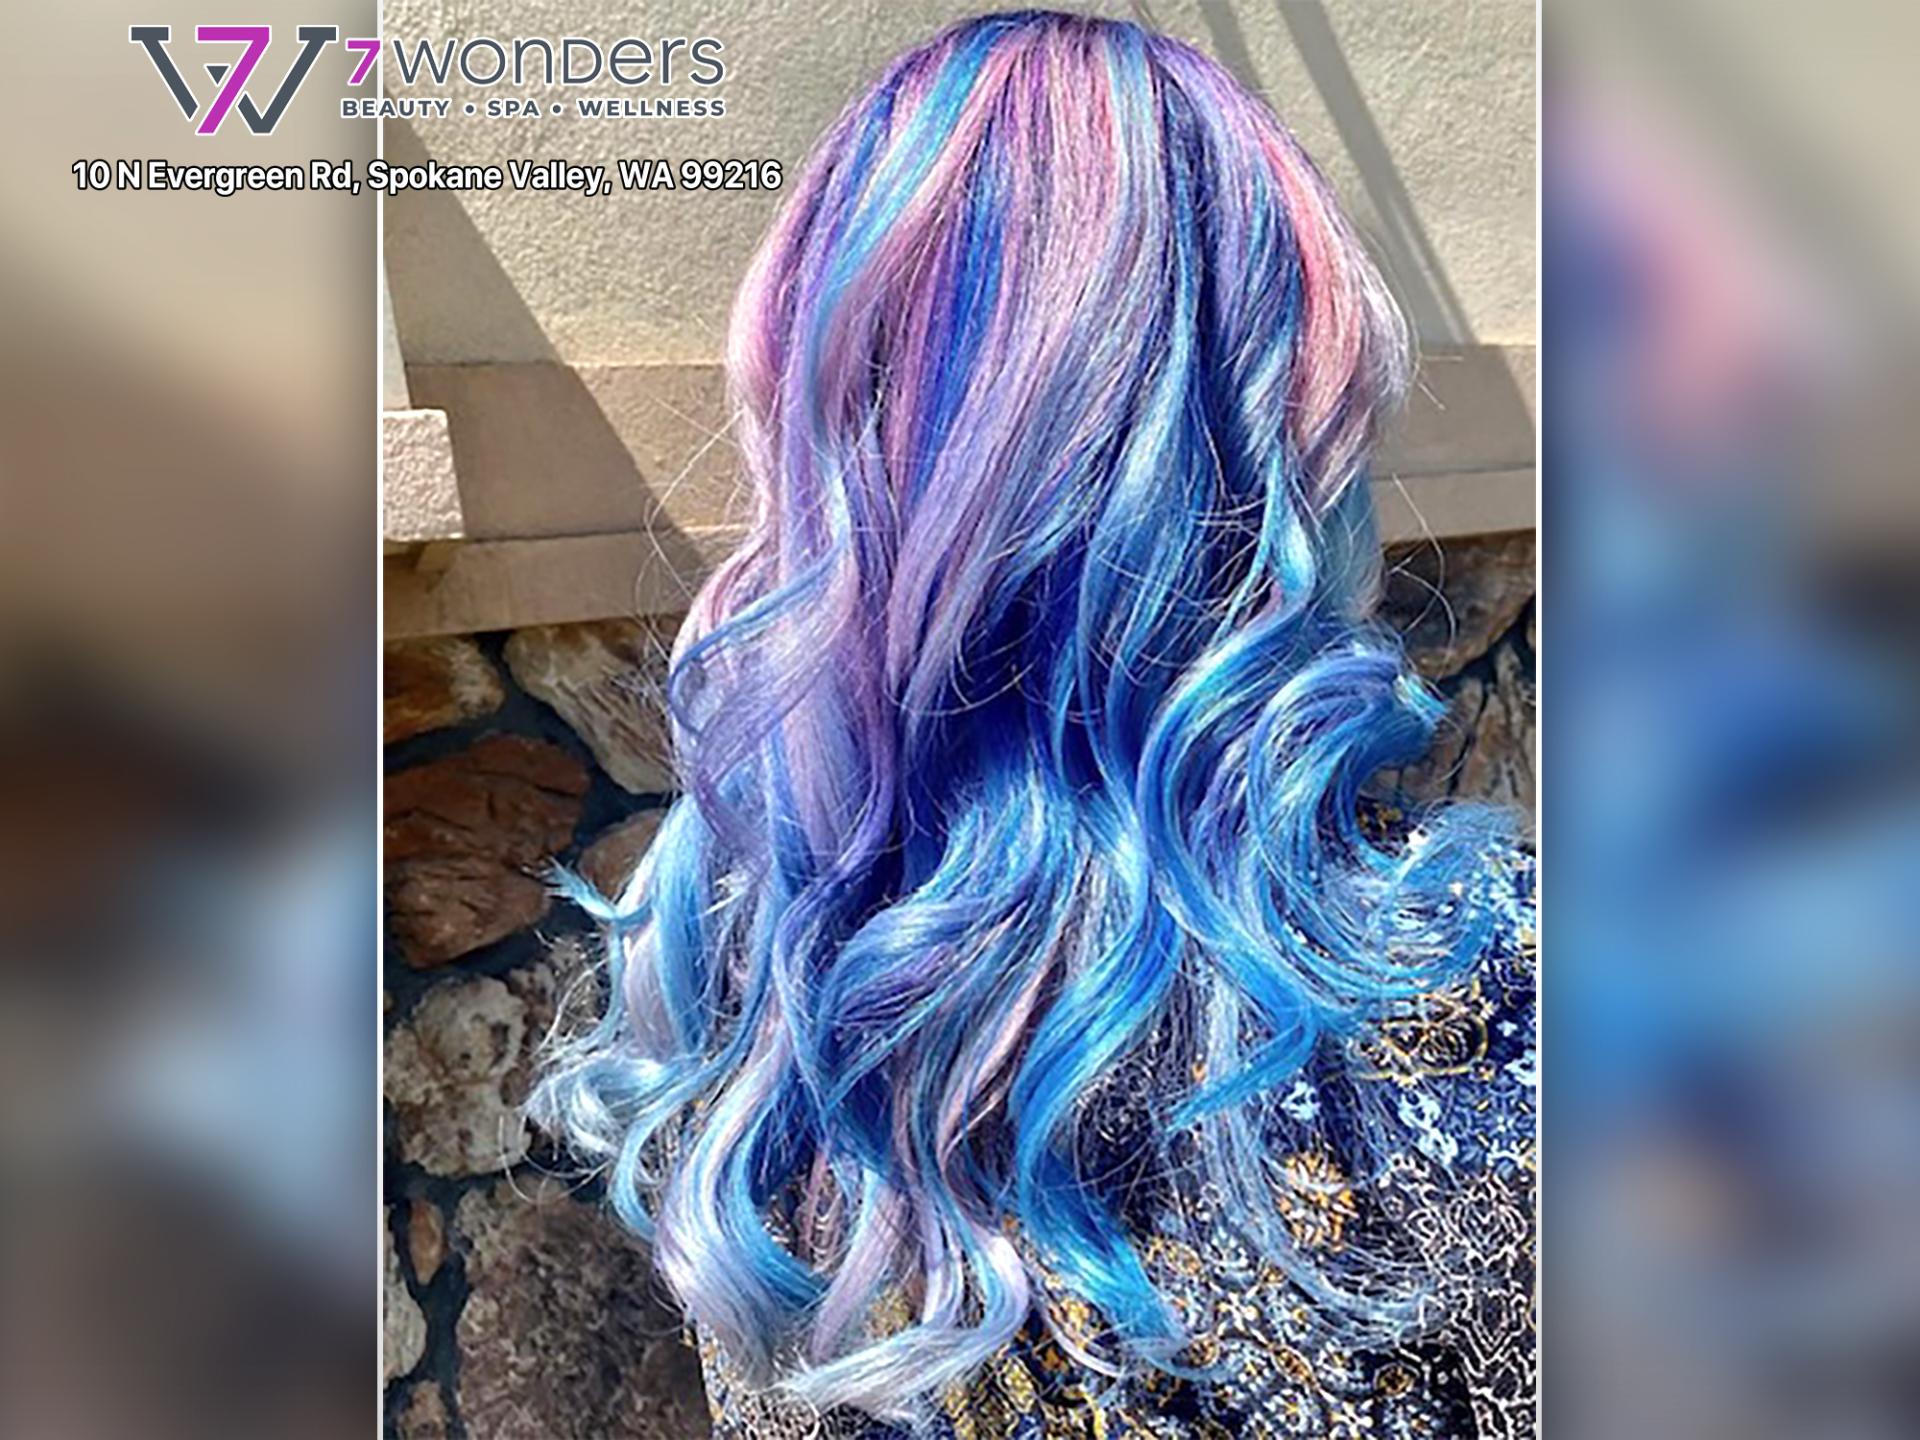 8 Types Of Hair Color Ideas To Switch Up Your Style | 7 Wonders Barber and Spa in Spokane Valley, WA 99216